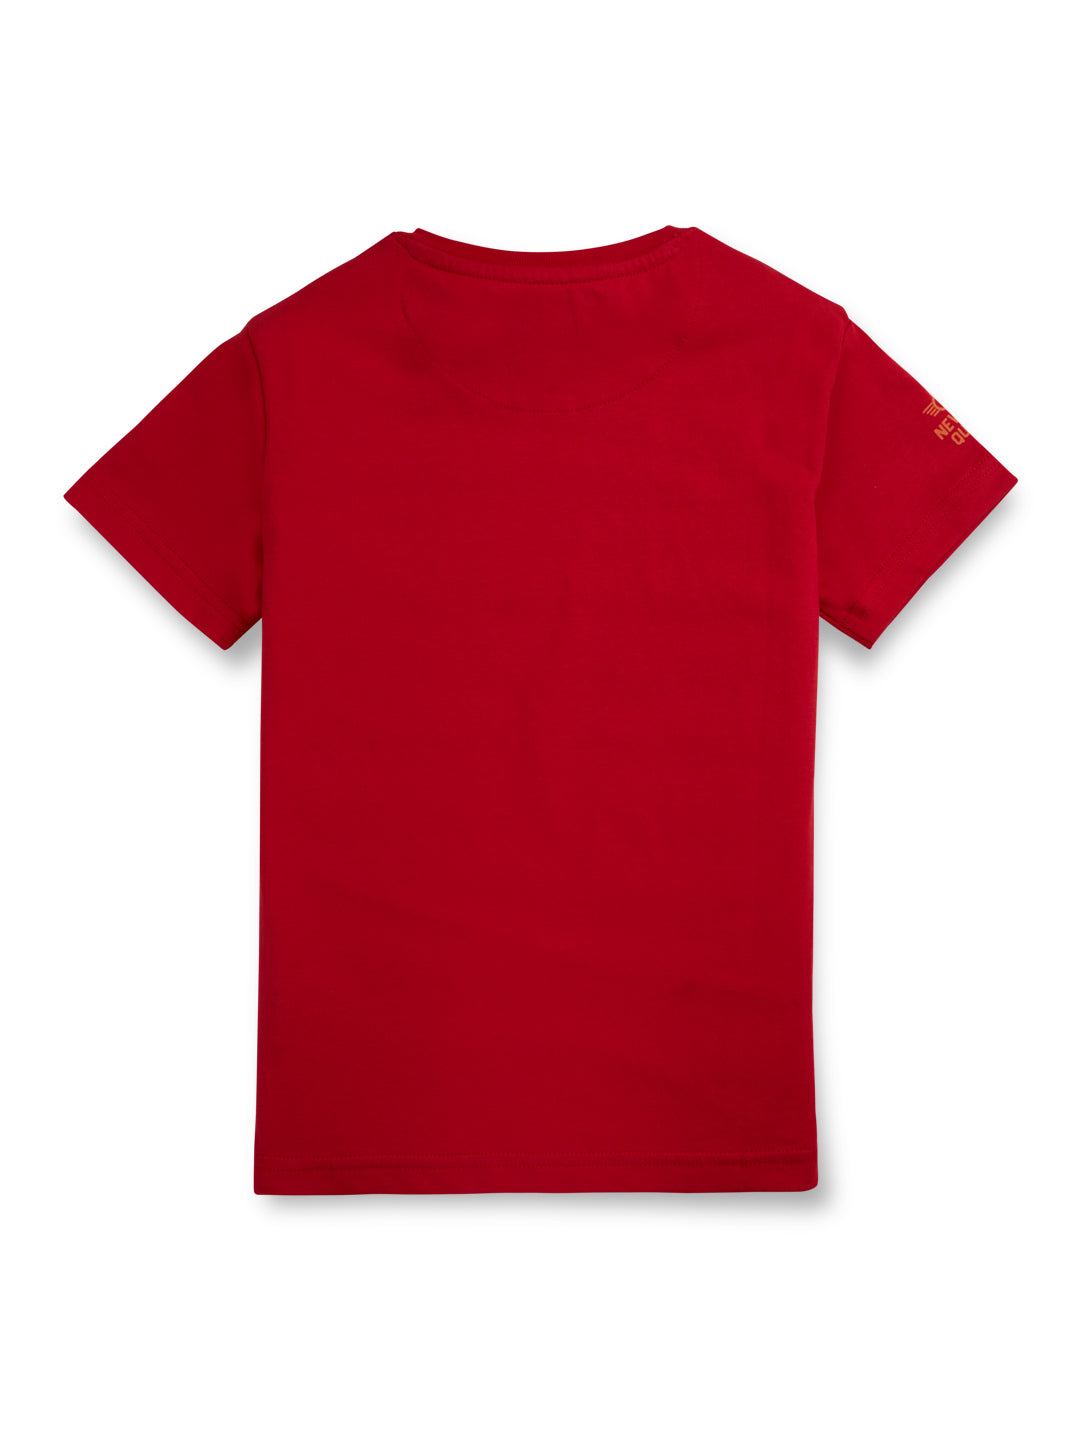 Boys Red Solid Cotton Half Sleeves T-Shirt